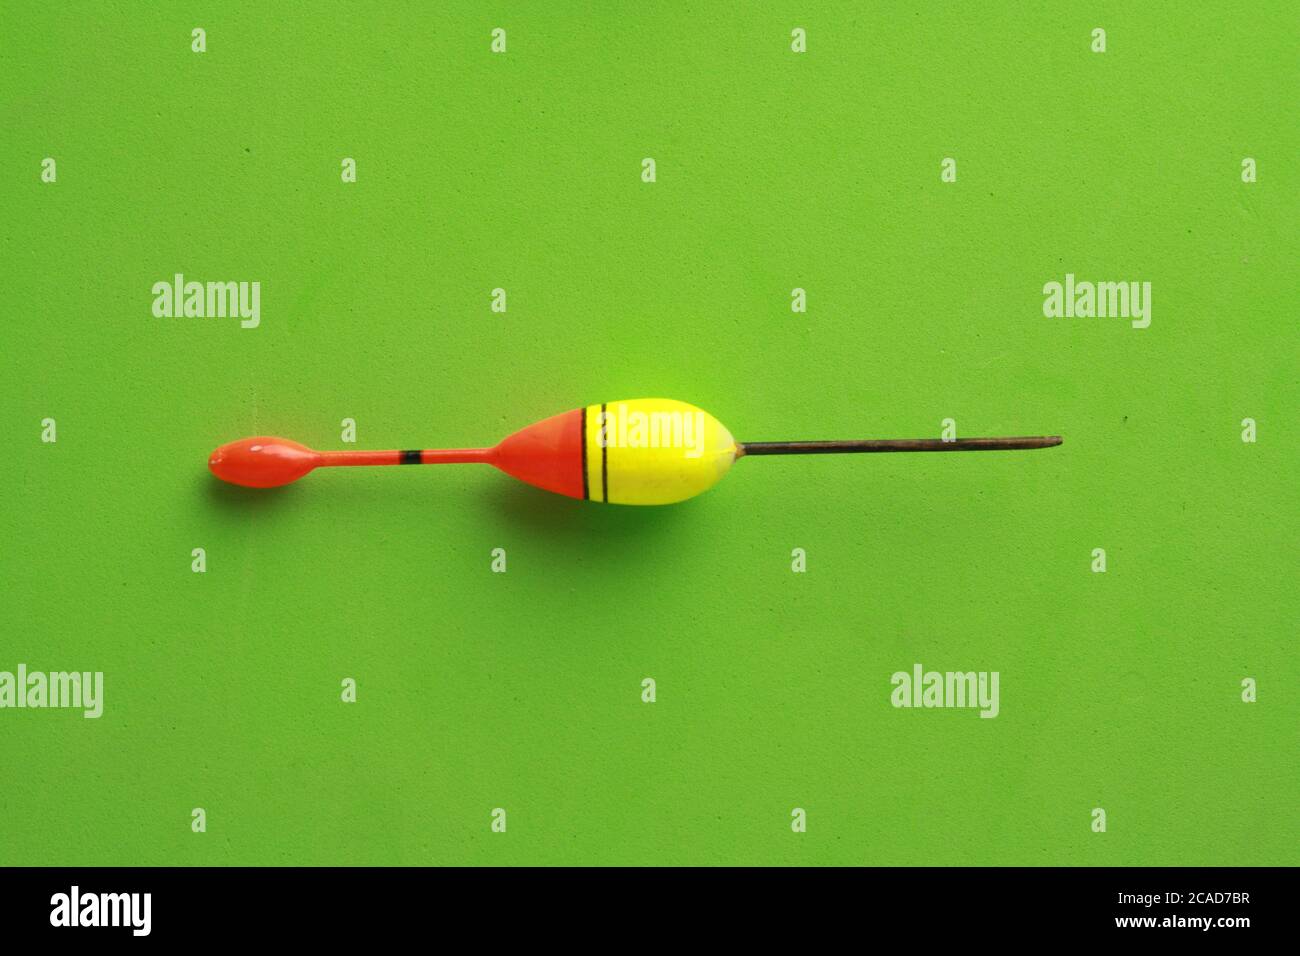 https://c8.alamy.com/comp/2CAD7BR/top-view-of-a-colorful-fishing-rod-bobber-on-a-green-background-2CAD7BR.jpg